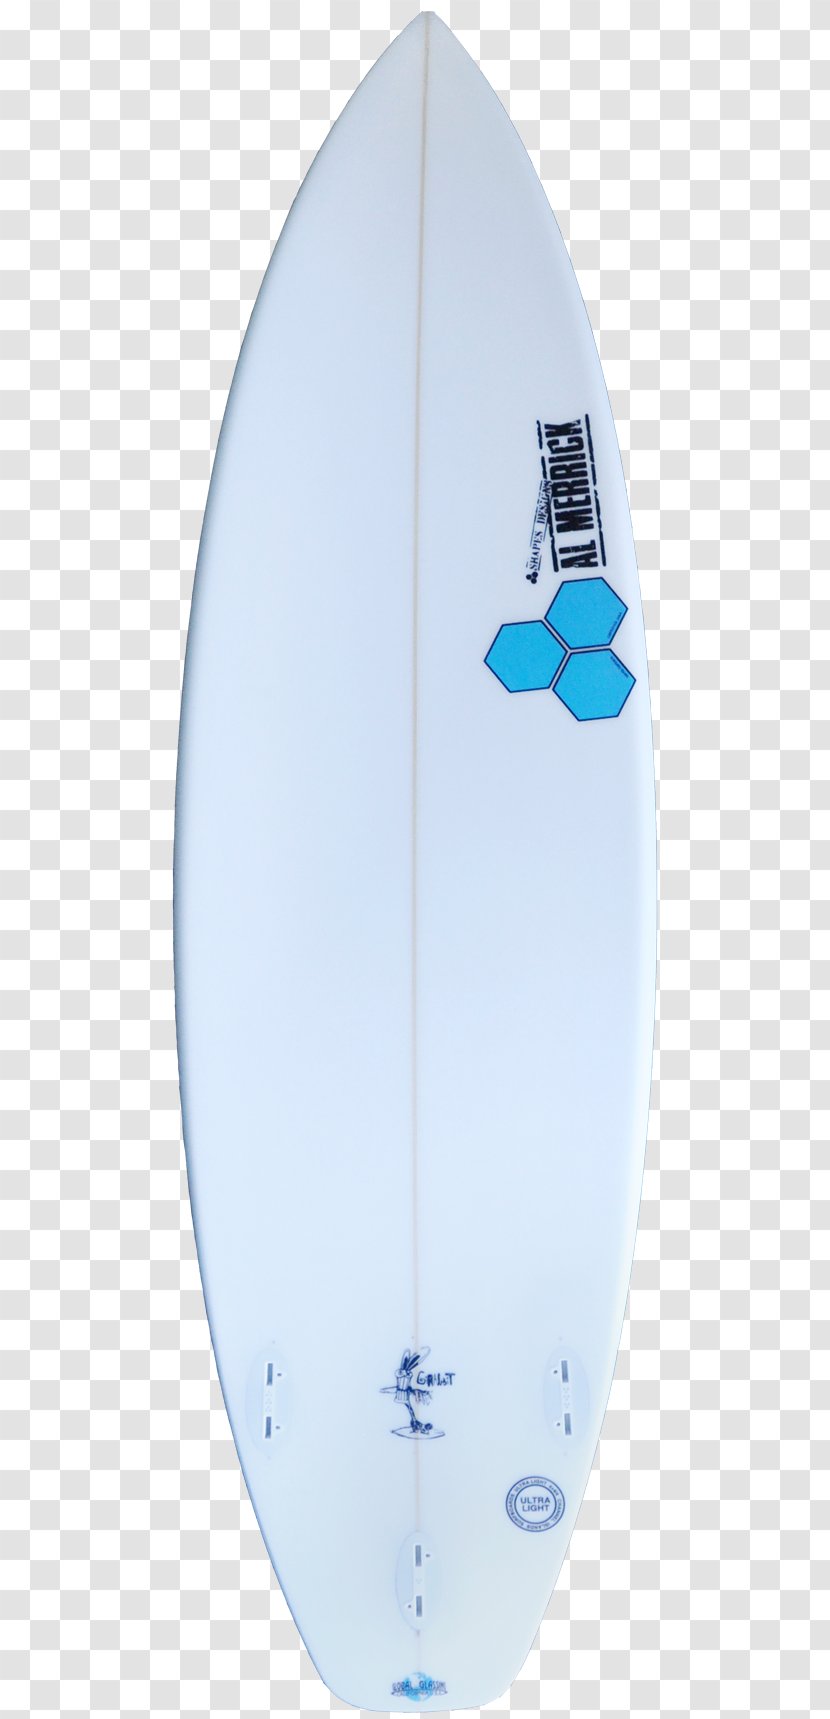 Surfboard Diving & Swimming Fins - Surfing Equipment And Supplies - 3D Deck Transparent PNG